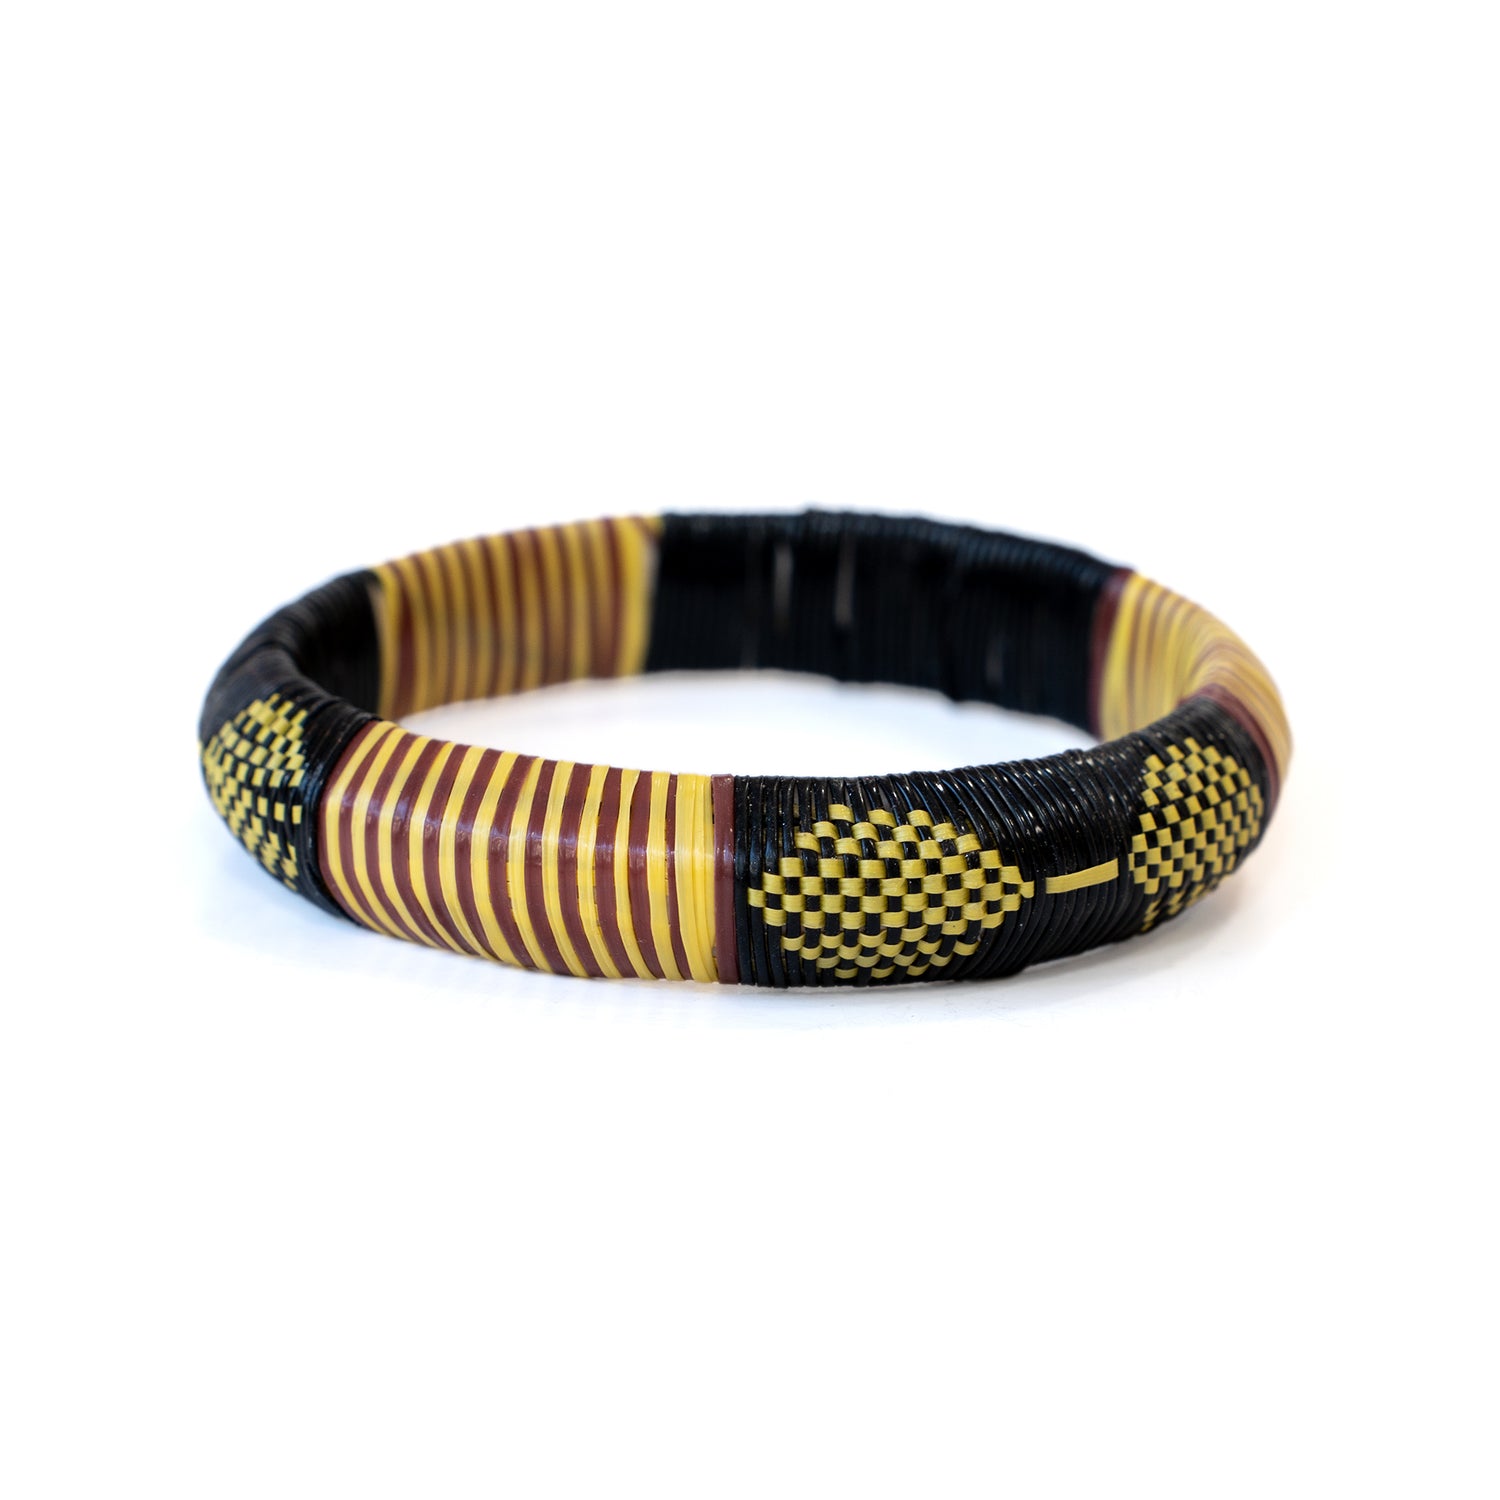 Woven Recycled Plastic Bracelets - Black, White, Red, Yellow, & Green from  Mali